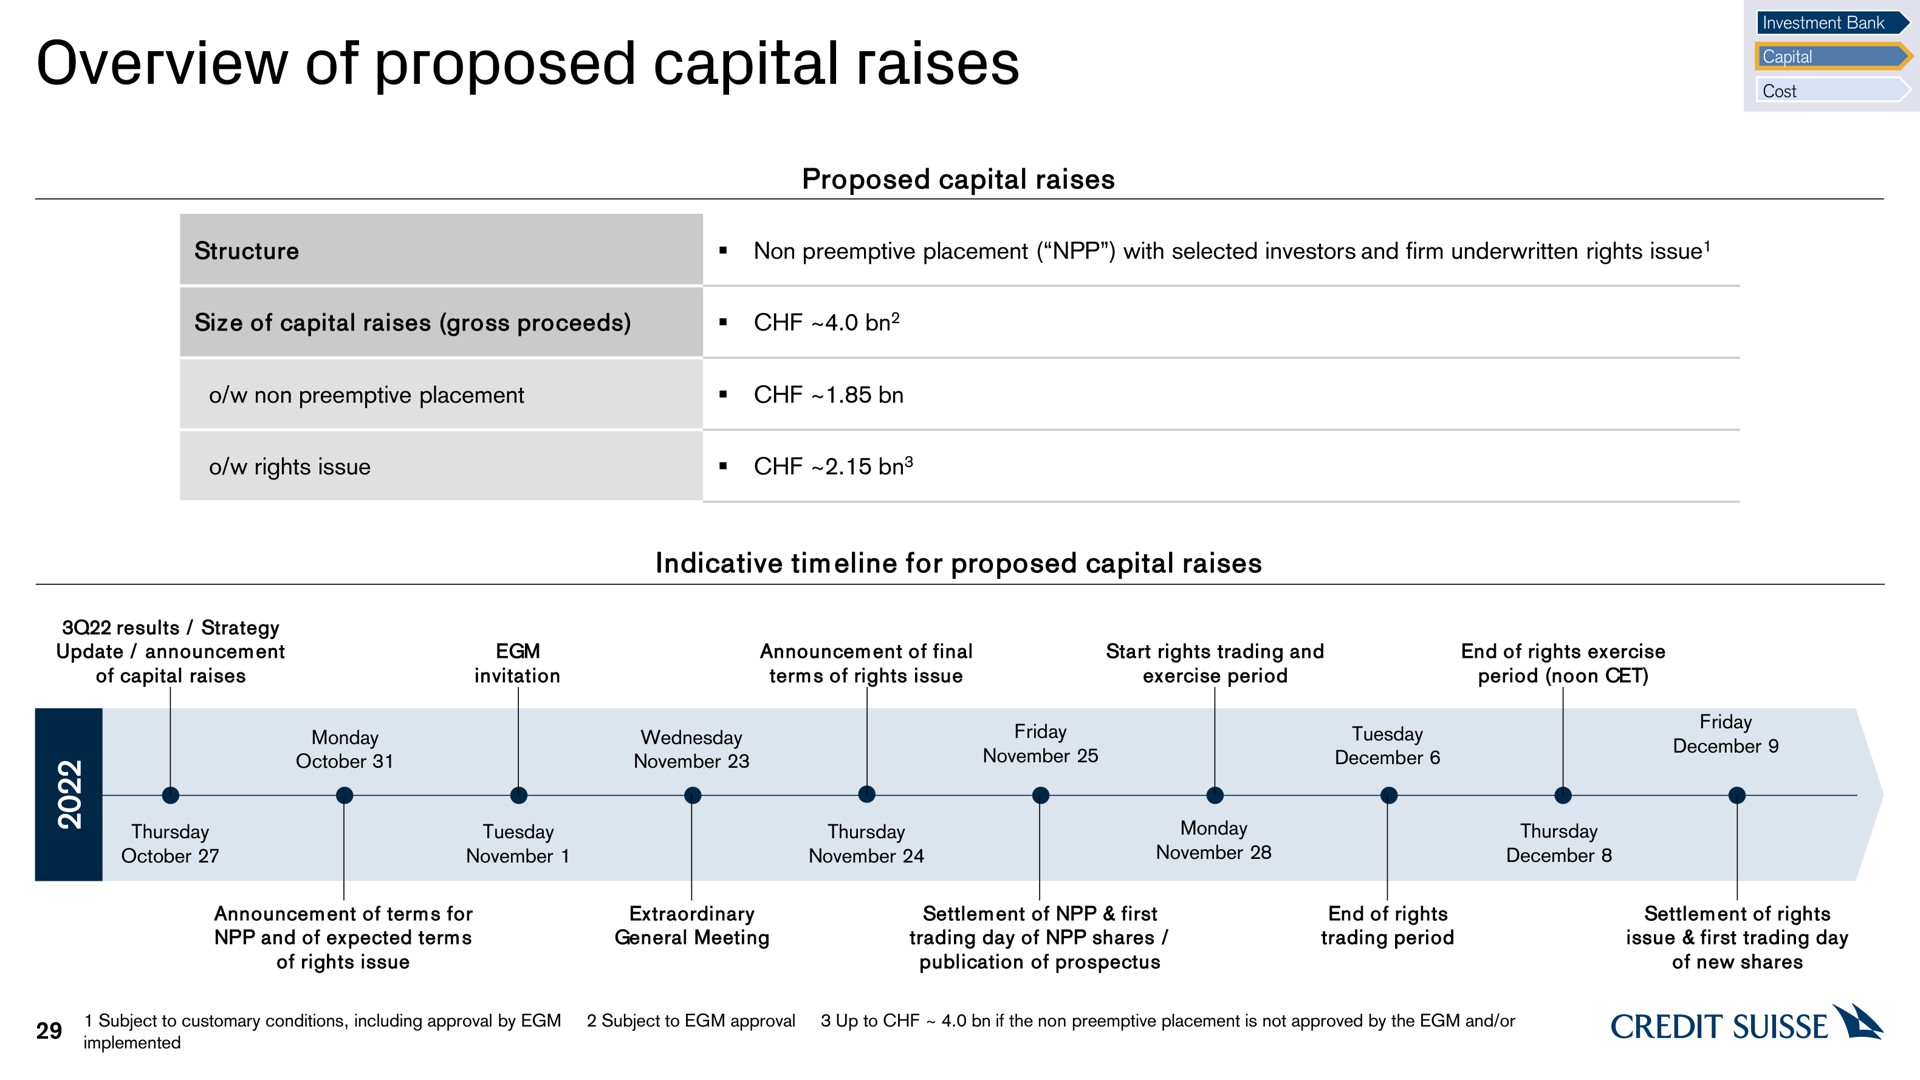 overview of proposed capital raises | Credit Suisse